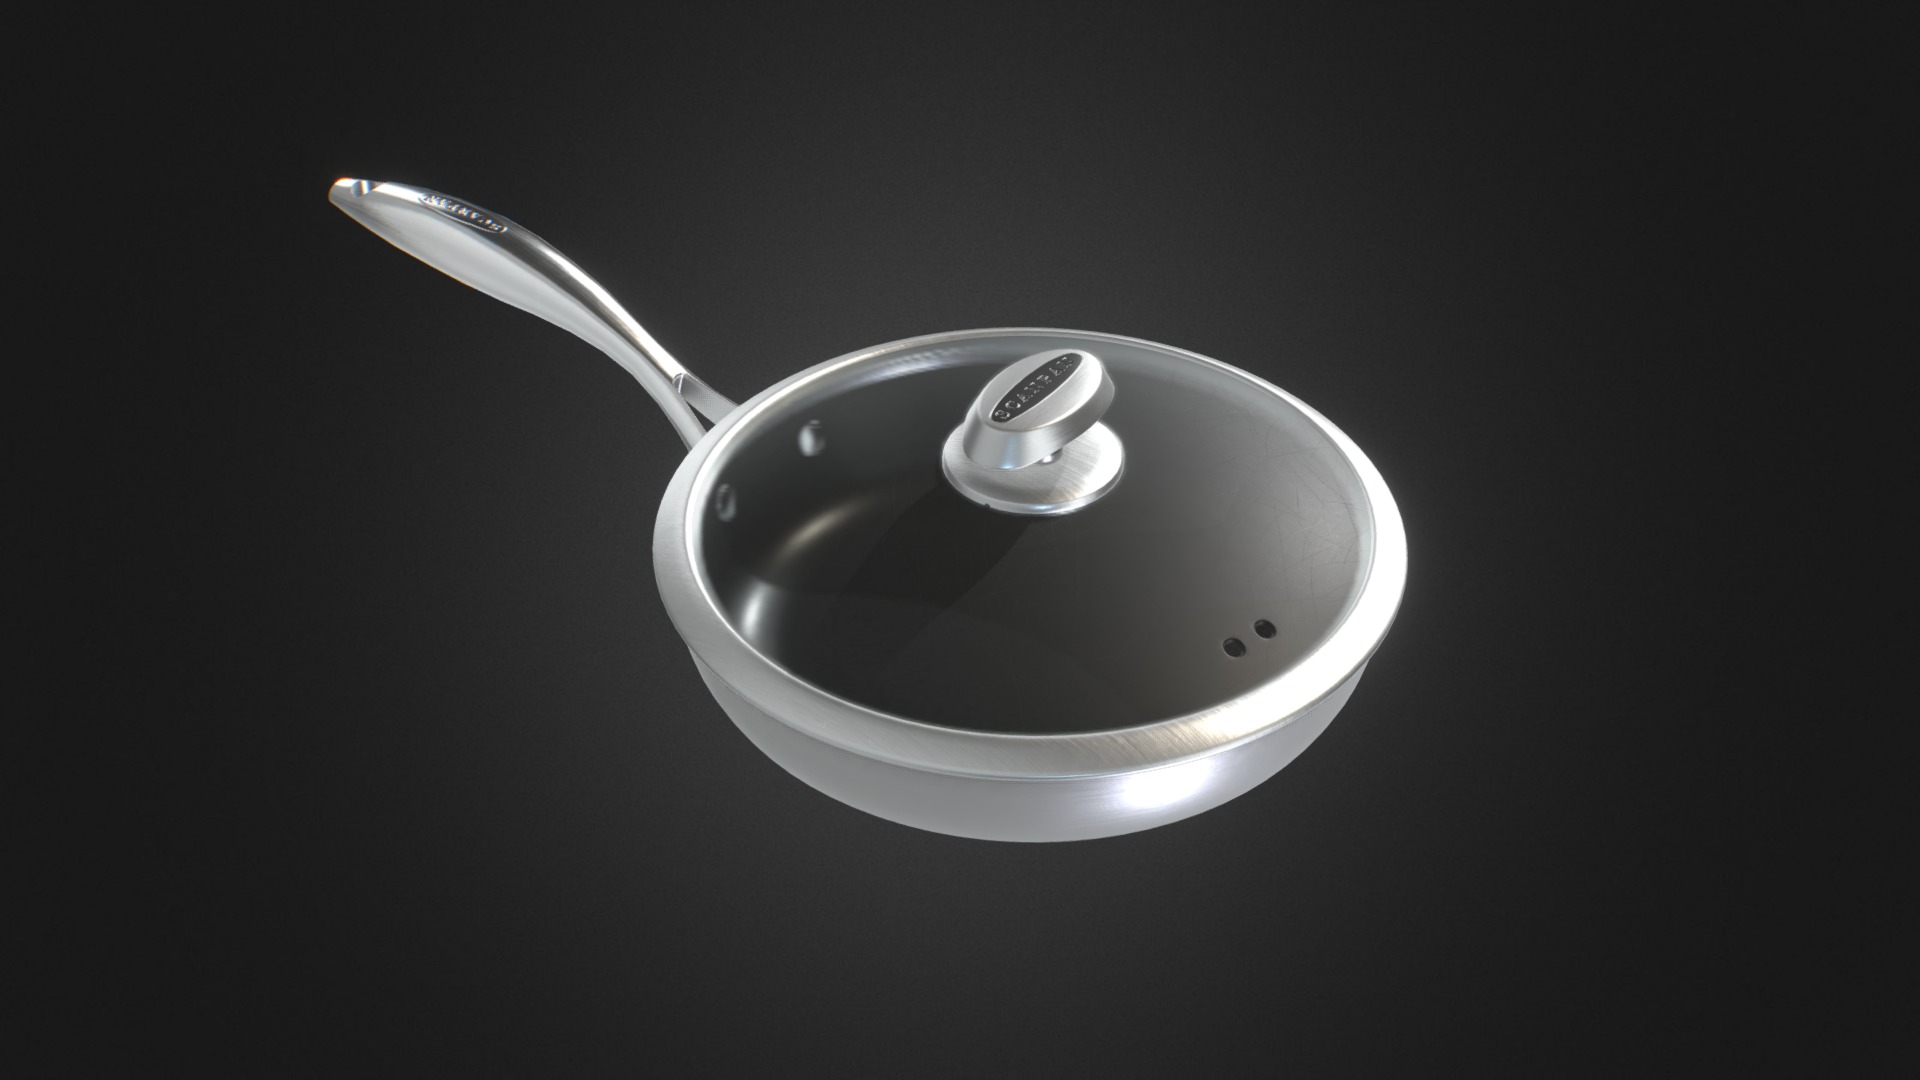 3D model Scanpan Saucepan with Lid - This is a 3D model of the Scanpan Saucepan with Lid. The 3D model is about a light bulb with a black background.